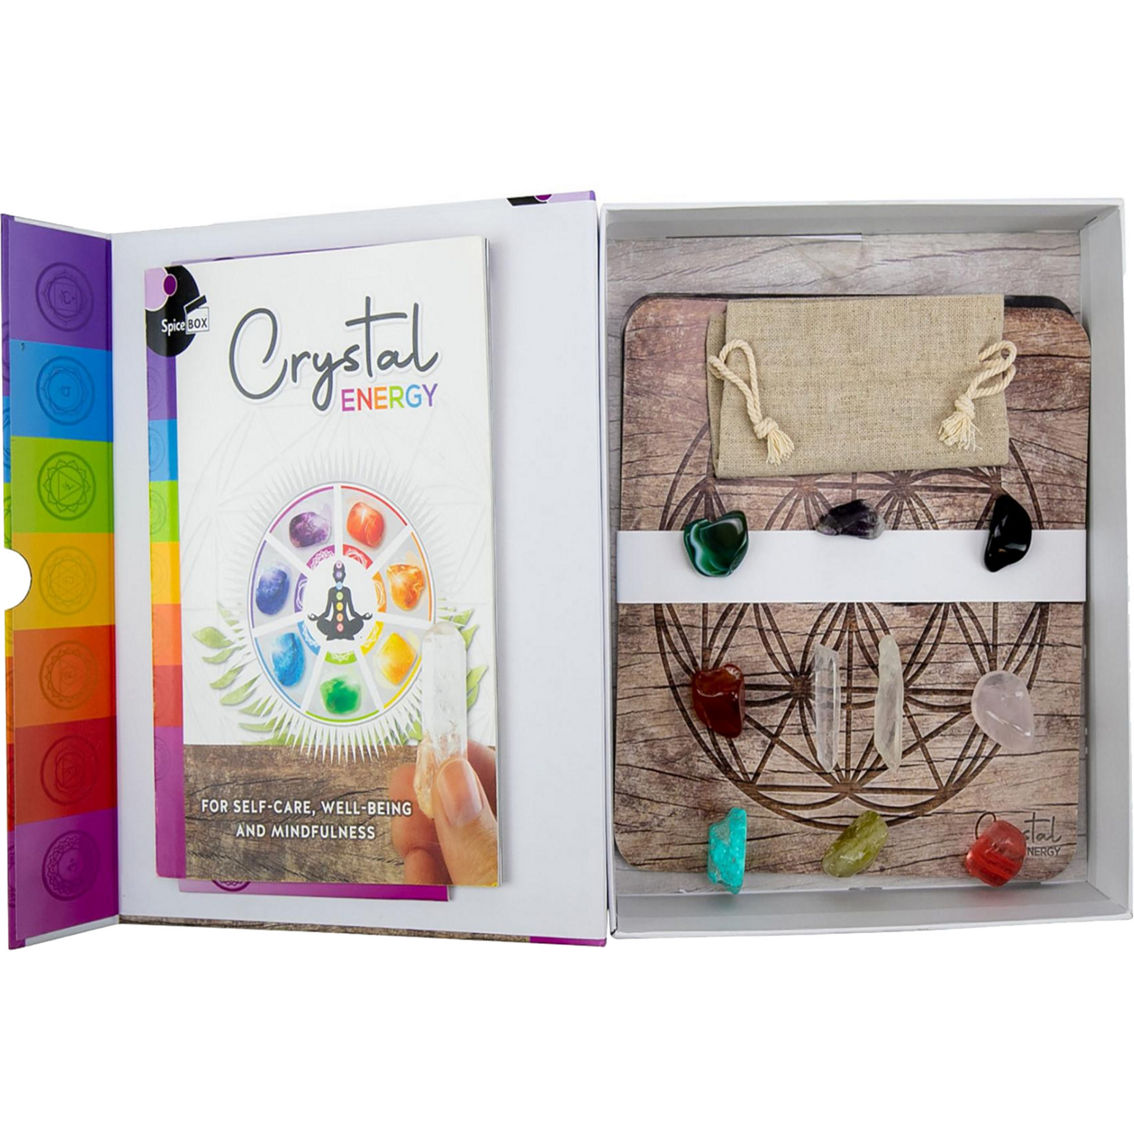 SpiceBox Gift Box: Crystal Energy - Image 3 of 5